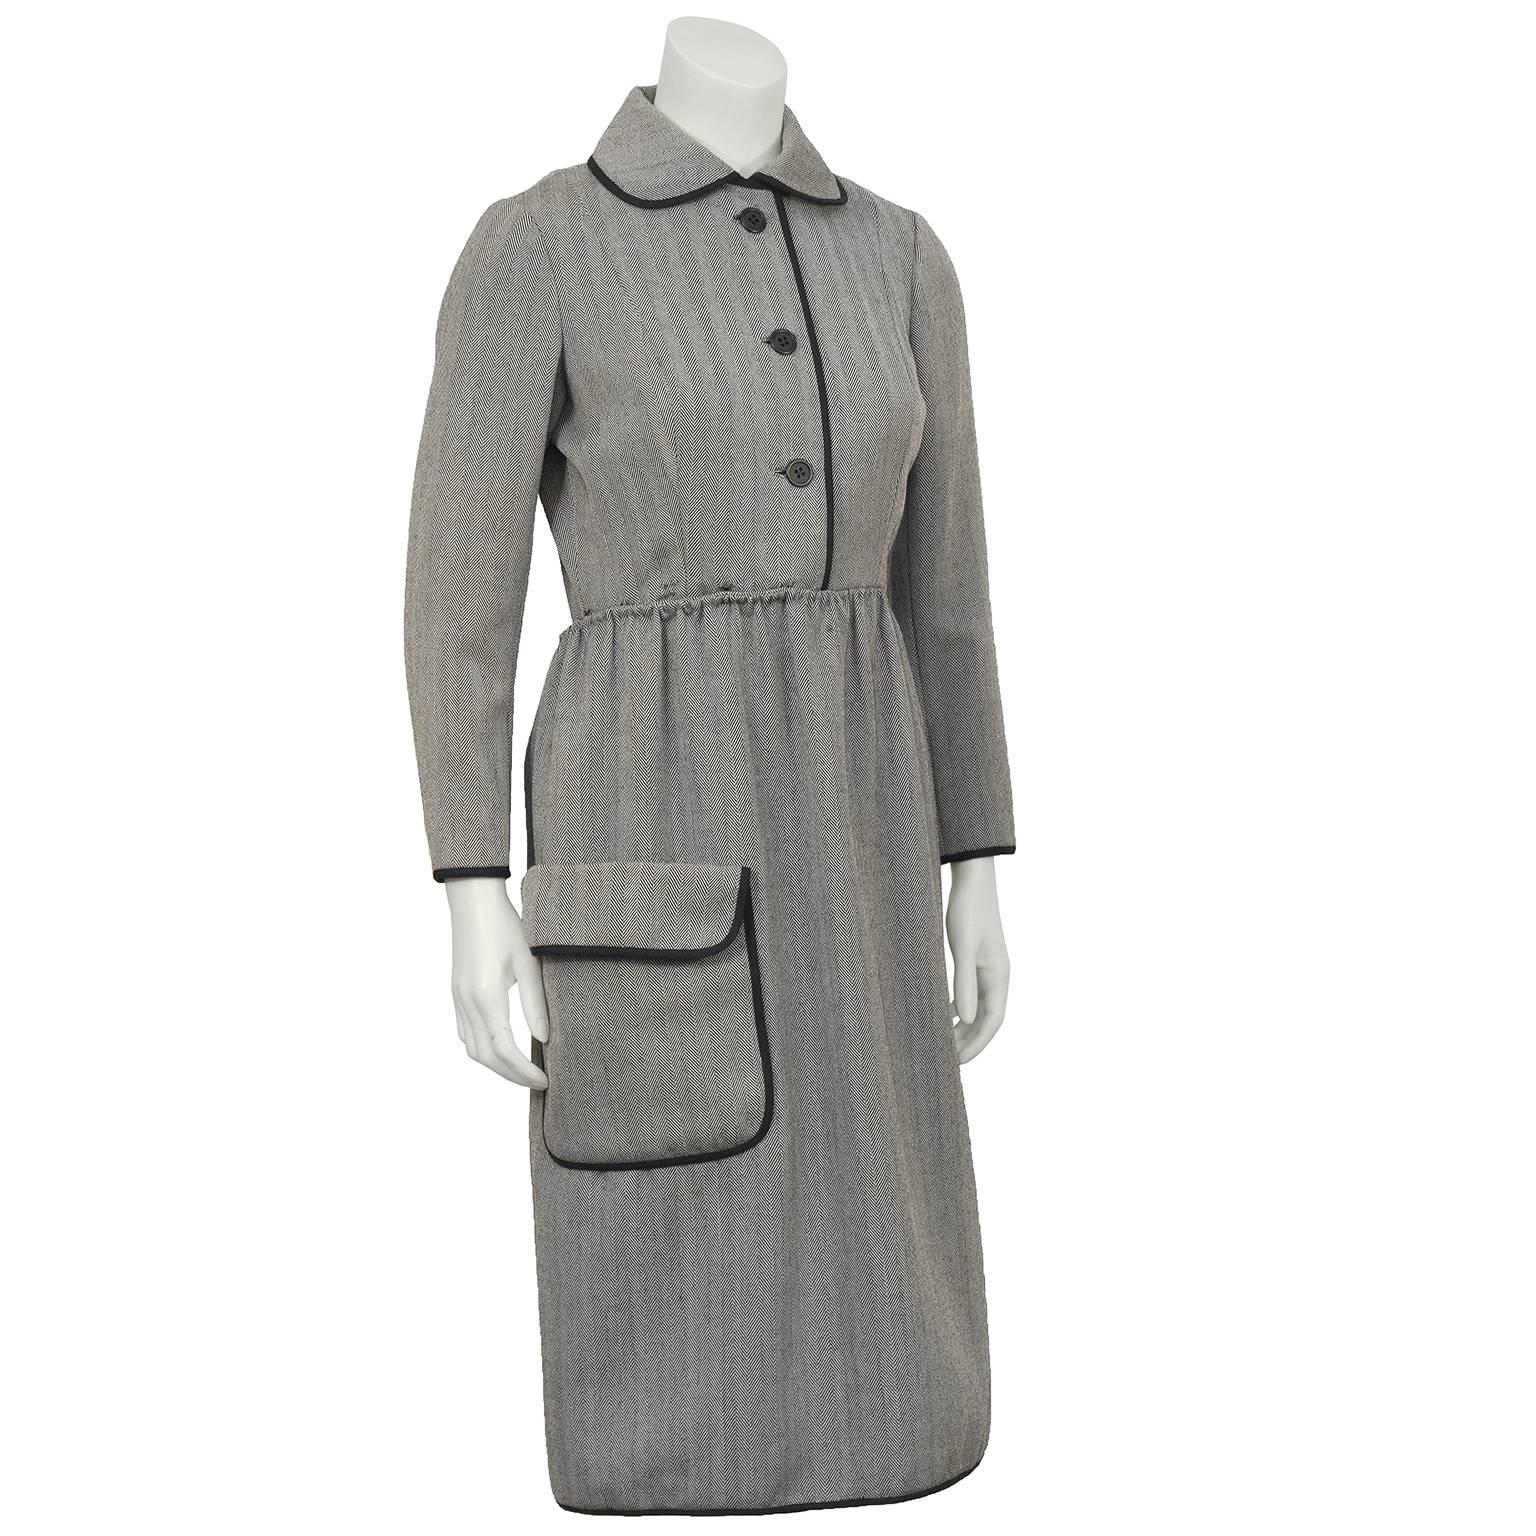 Chic 1960's Geoffrey Beene chocolate brown herring bone wool dress with exaggerated Peter Pan collar. Beautifully constructed with a series of buttons and hooks that allow the shirtwaist style skirt to wrap around and fasten in the back mirroring